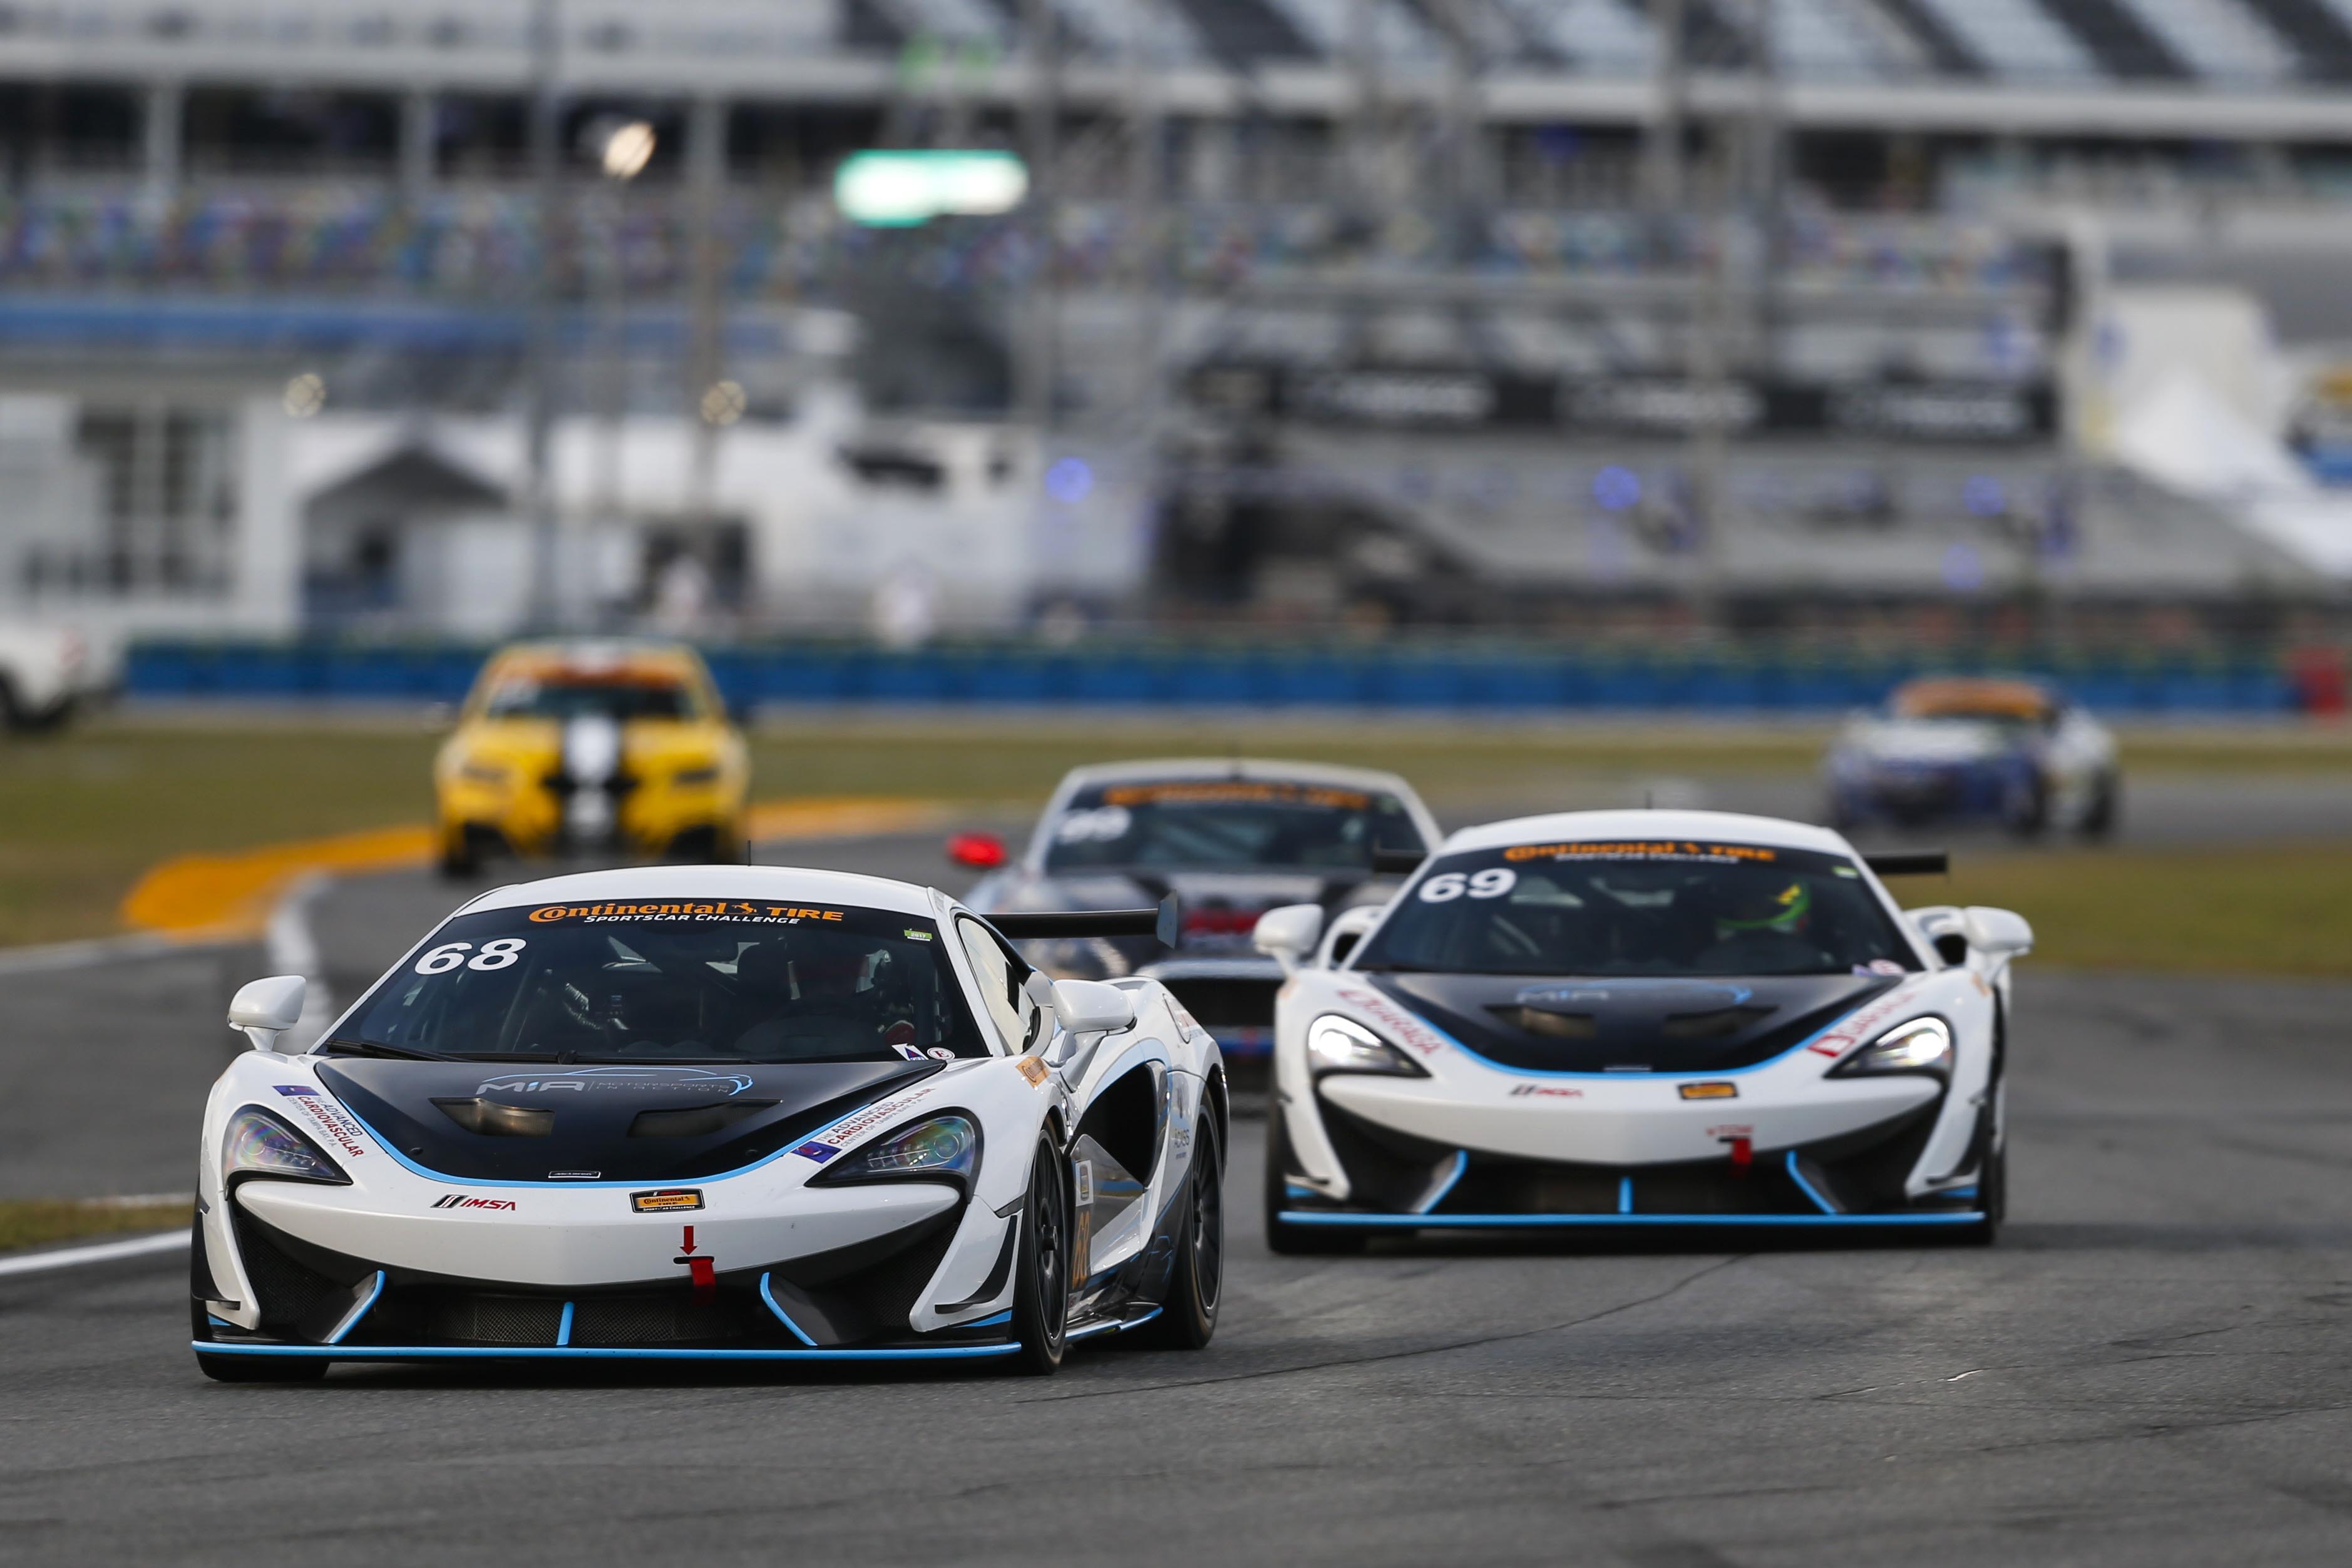 Promising Start For Motorsports In Action At The Daytona Track